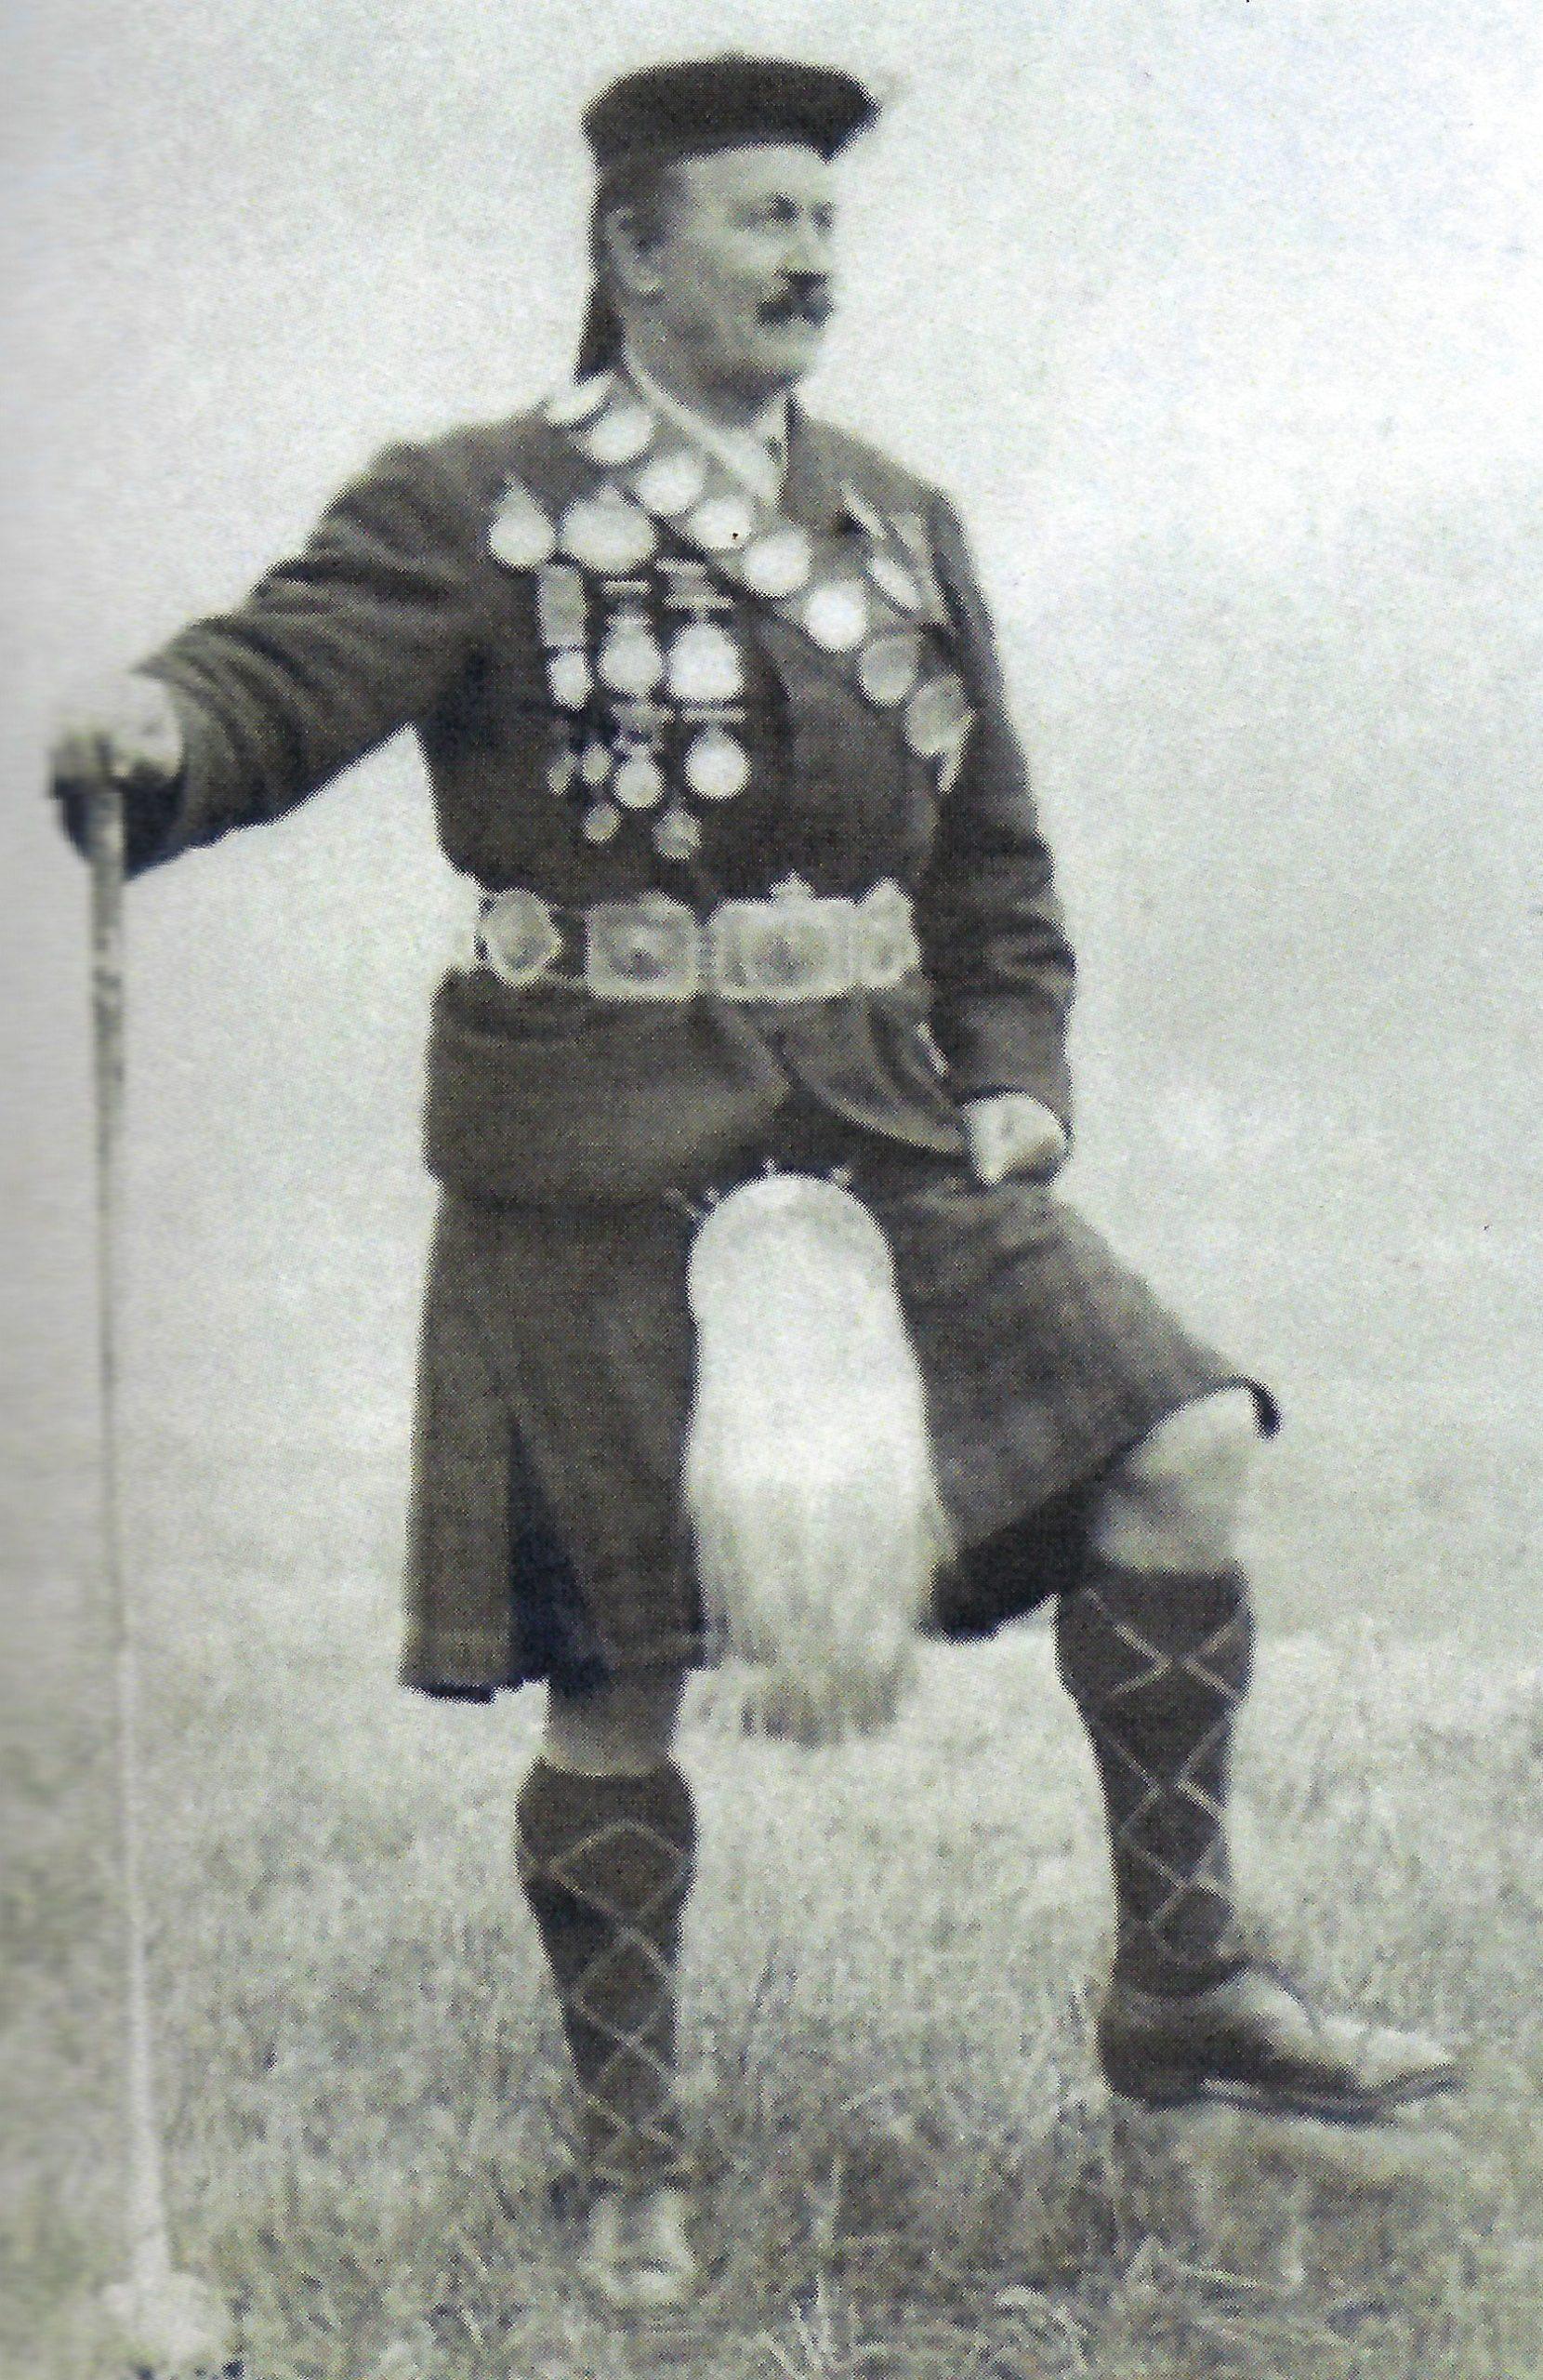 A photo of the athlete Donald Dinnie in kilt, coat, and hat.